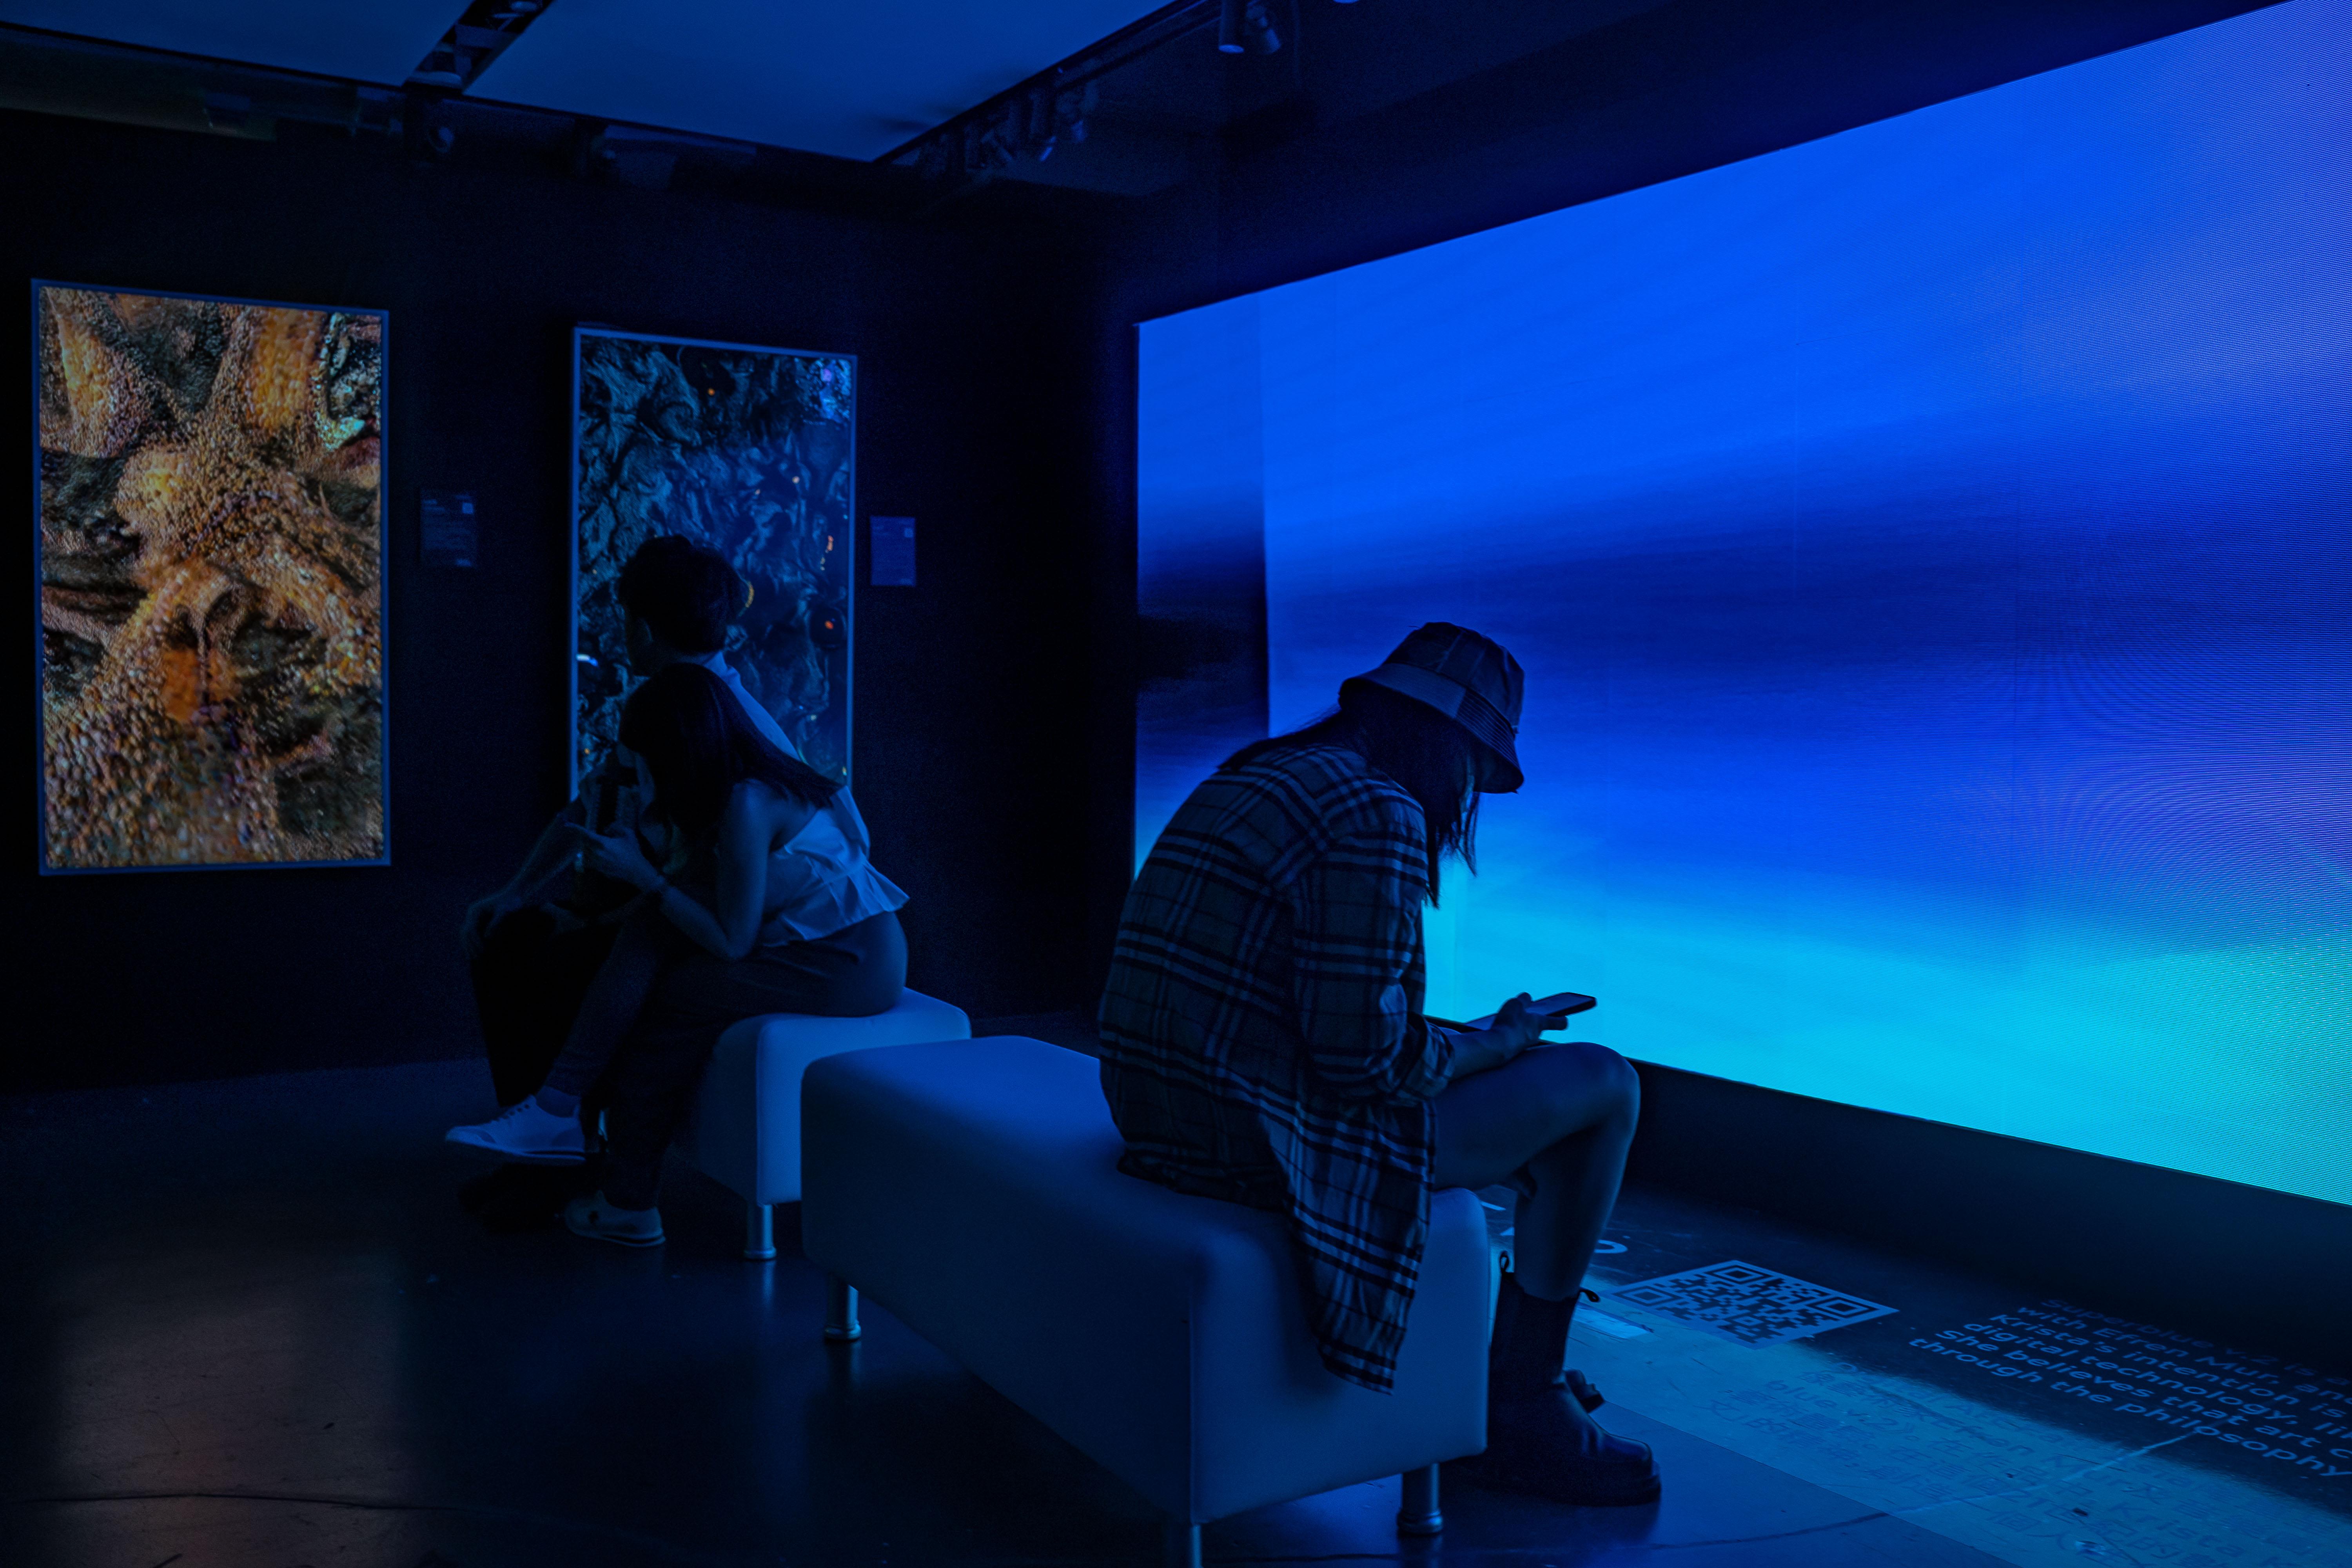 People using smartphones in front of an NFT gallery